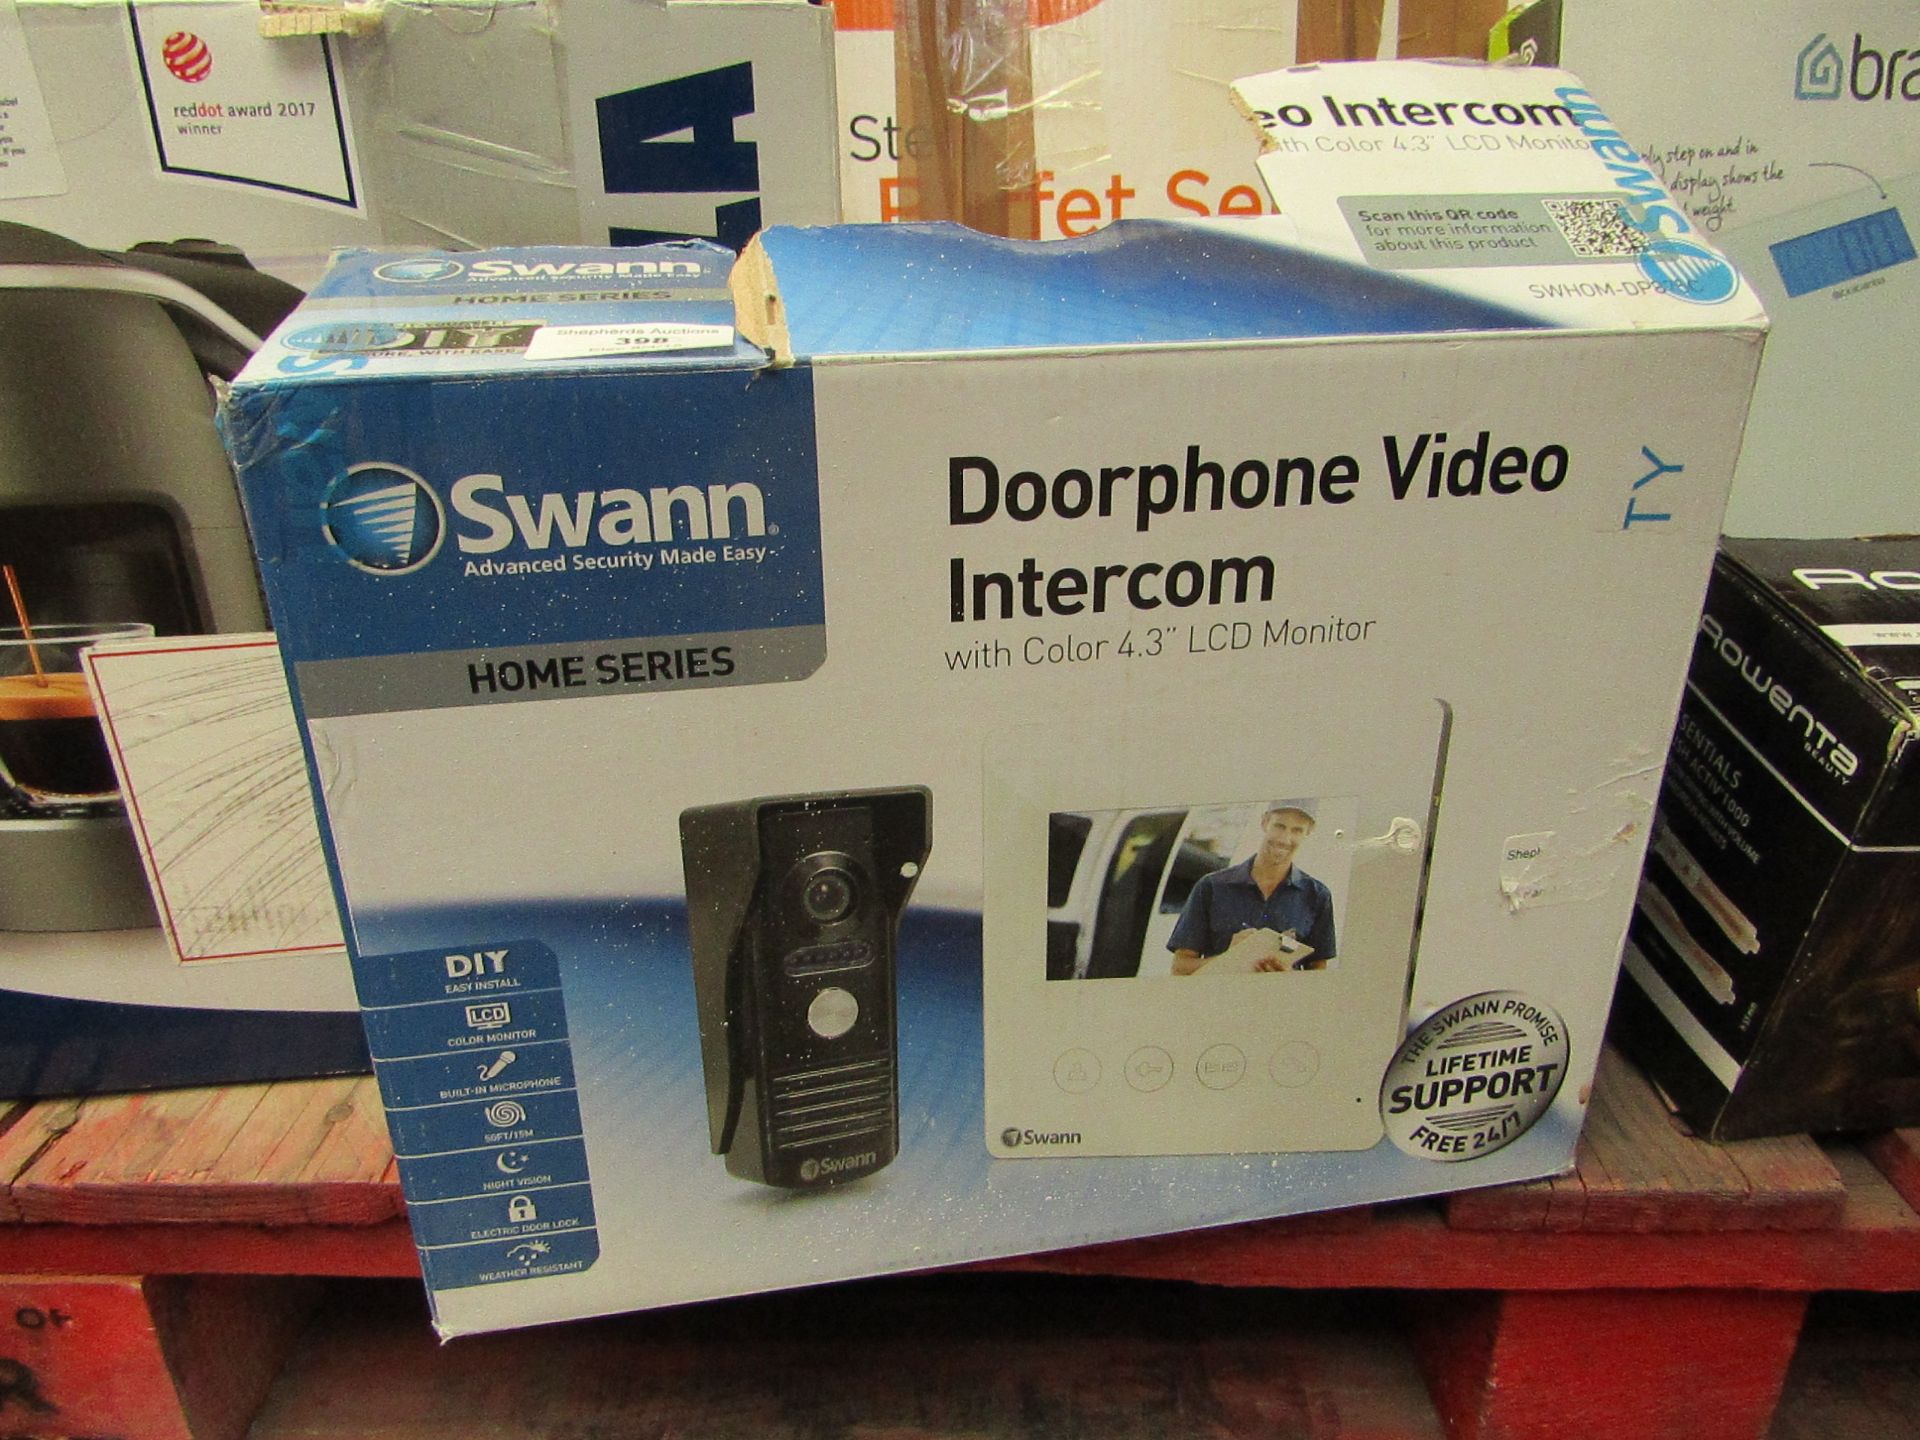 Swann doorphone video intercom with colour 4.3" LCD monitor. Unchecked & boxed.